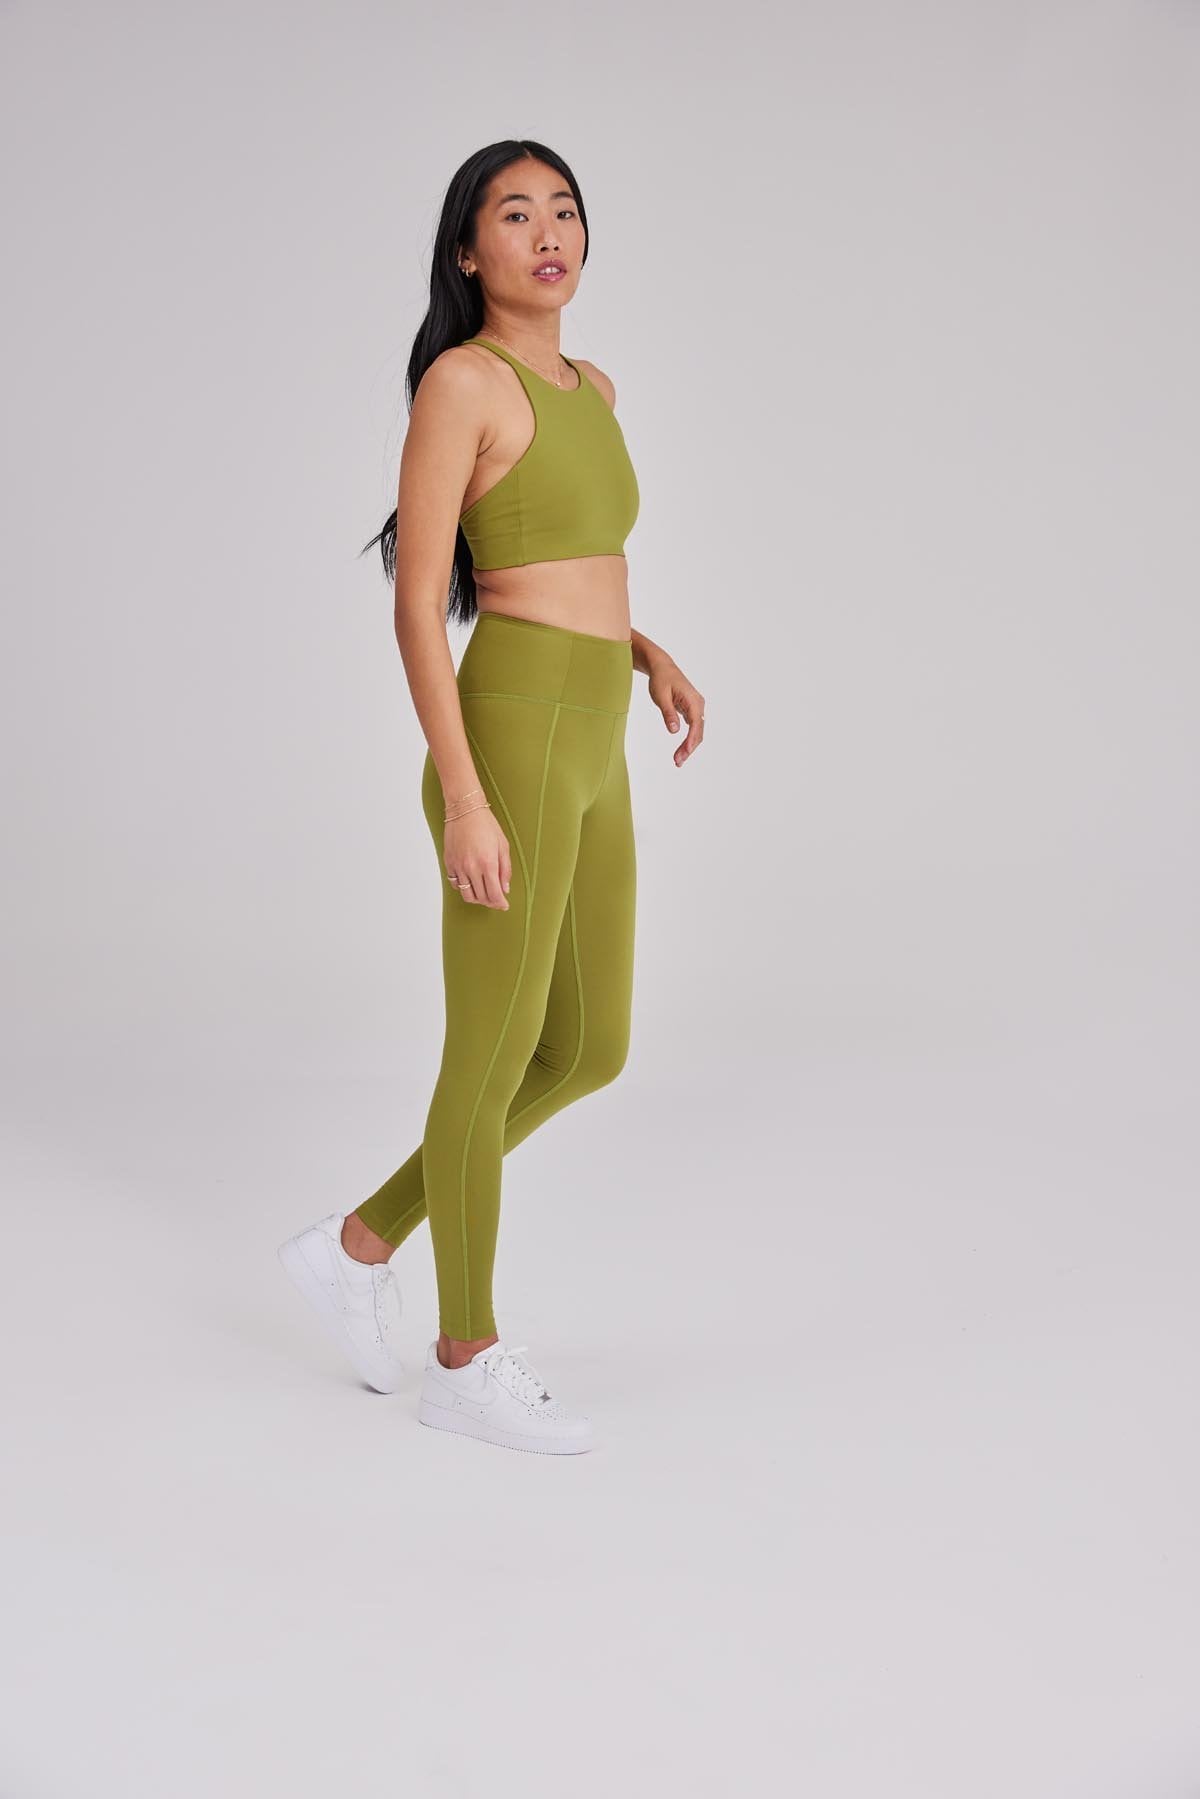 Girlfriend Collective Compressive High-Rise Legging, Girlfriend  Collective's Spring Line Is Filled With the Trendy Colours We Predicted For  2021